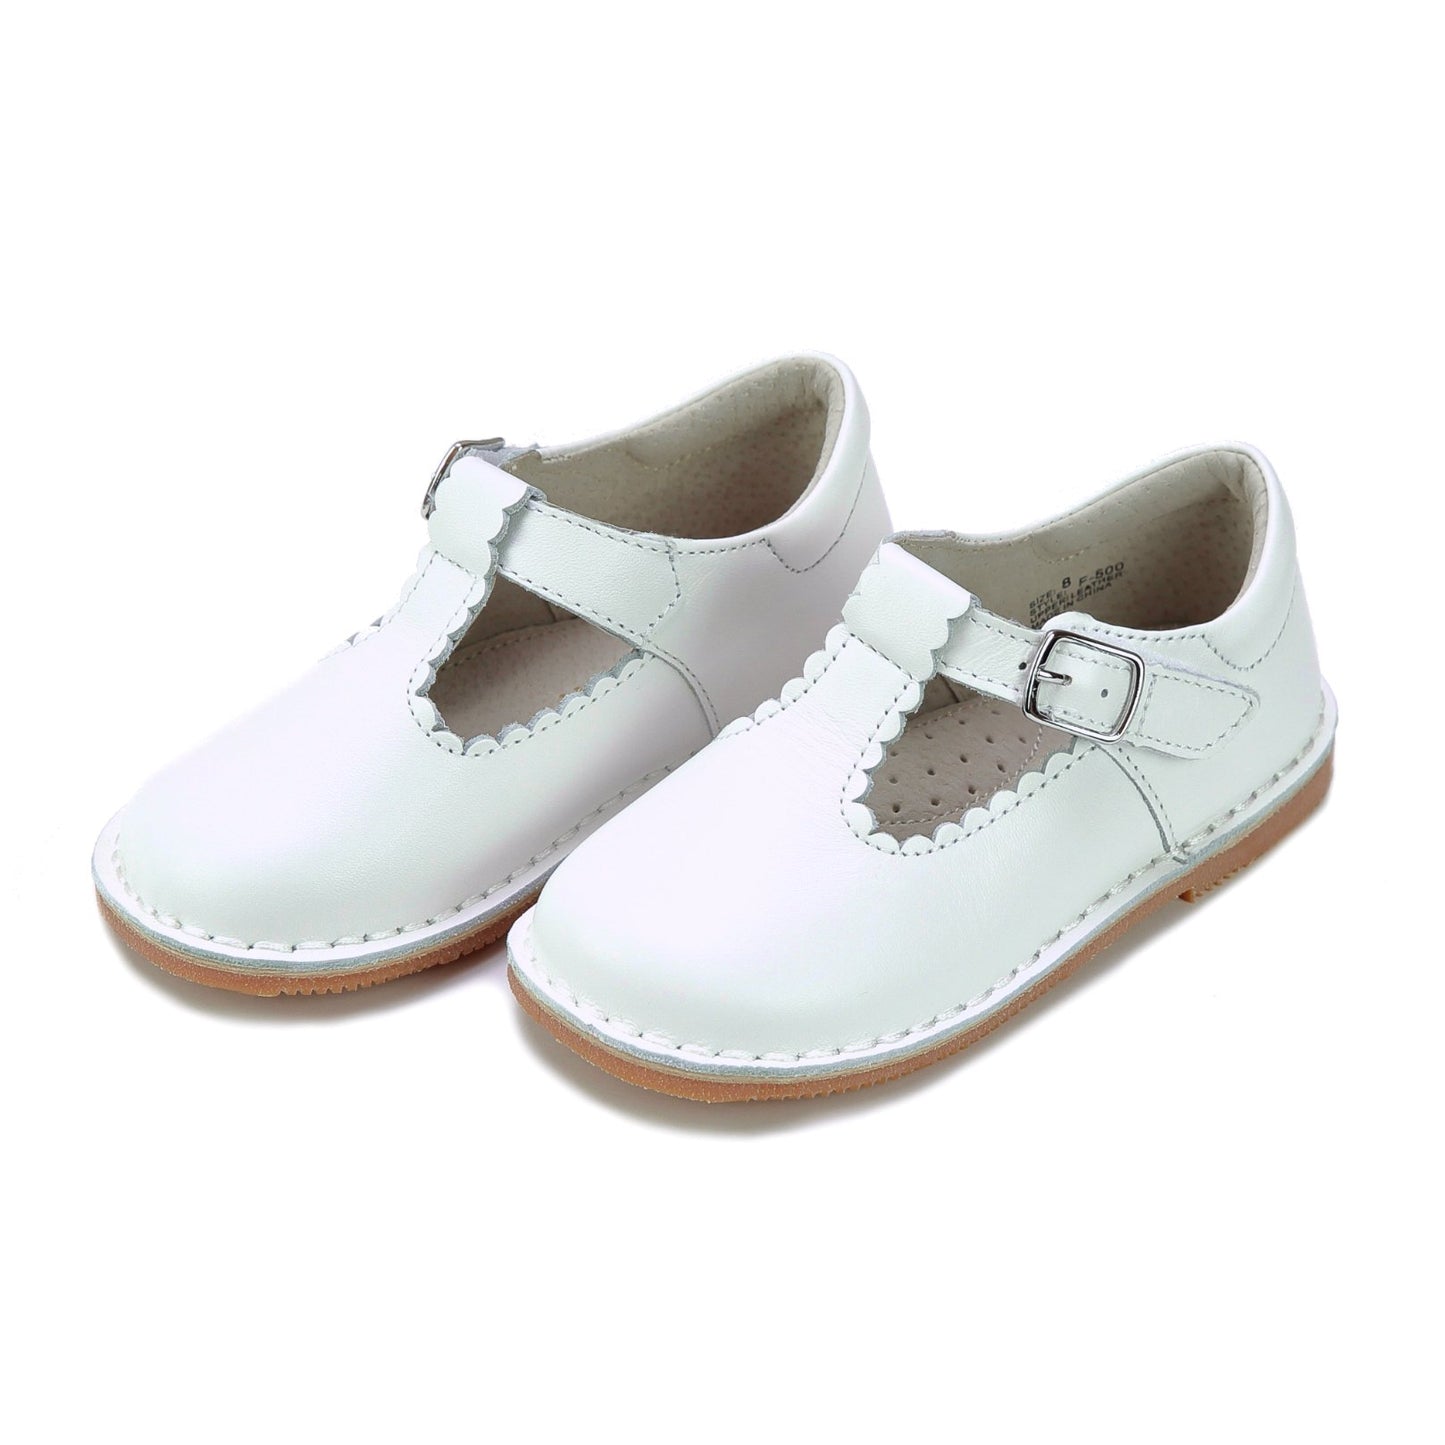 Selina Scalloped T-Strap Mary Jane - White Shoes L'Amour   